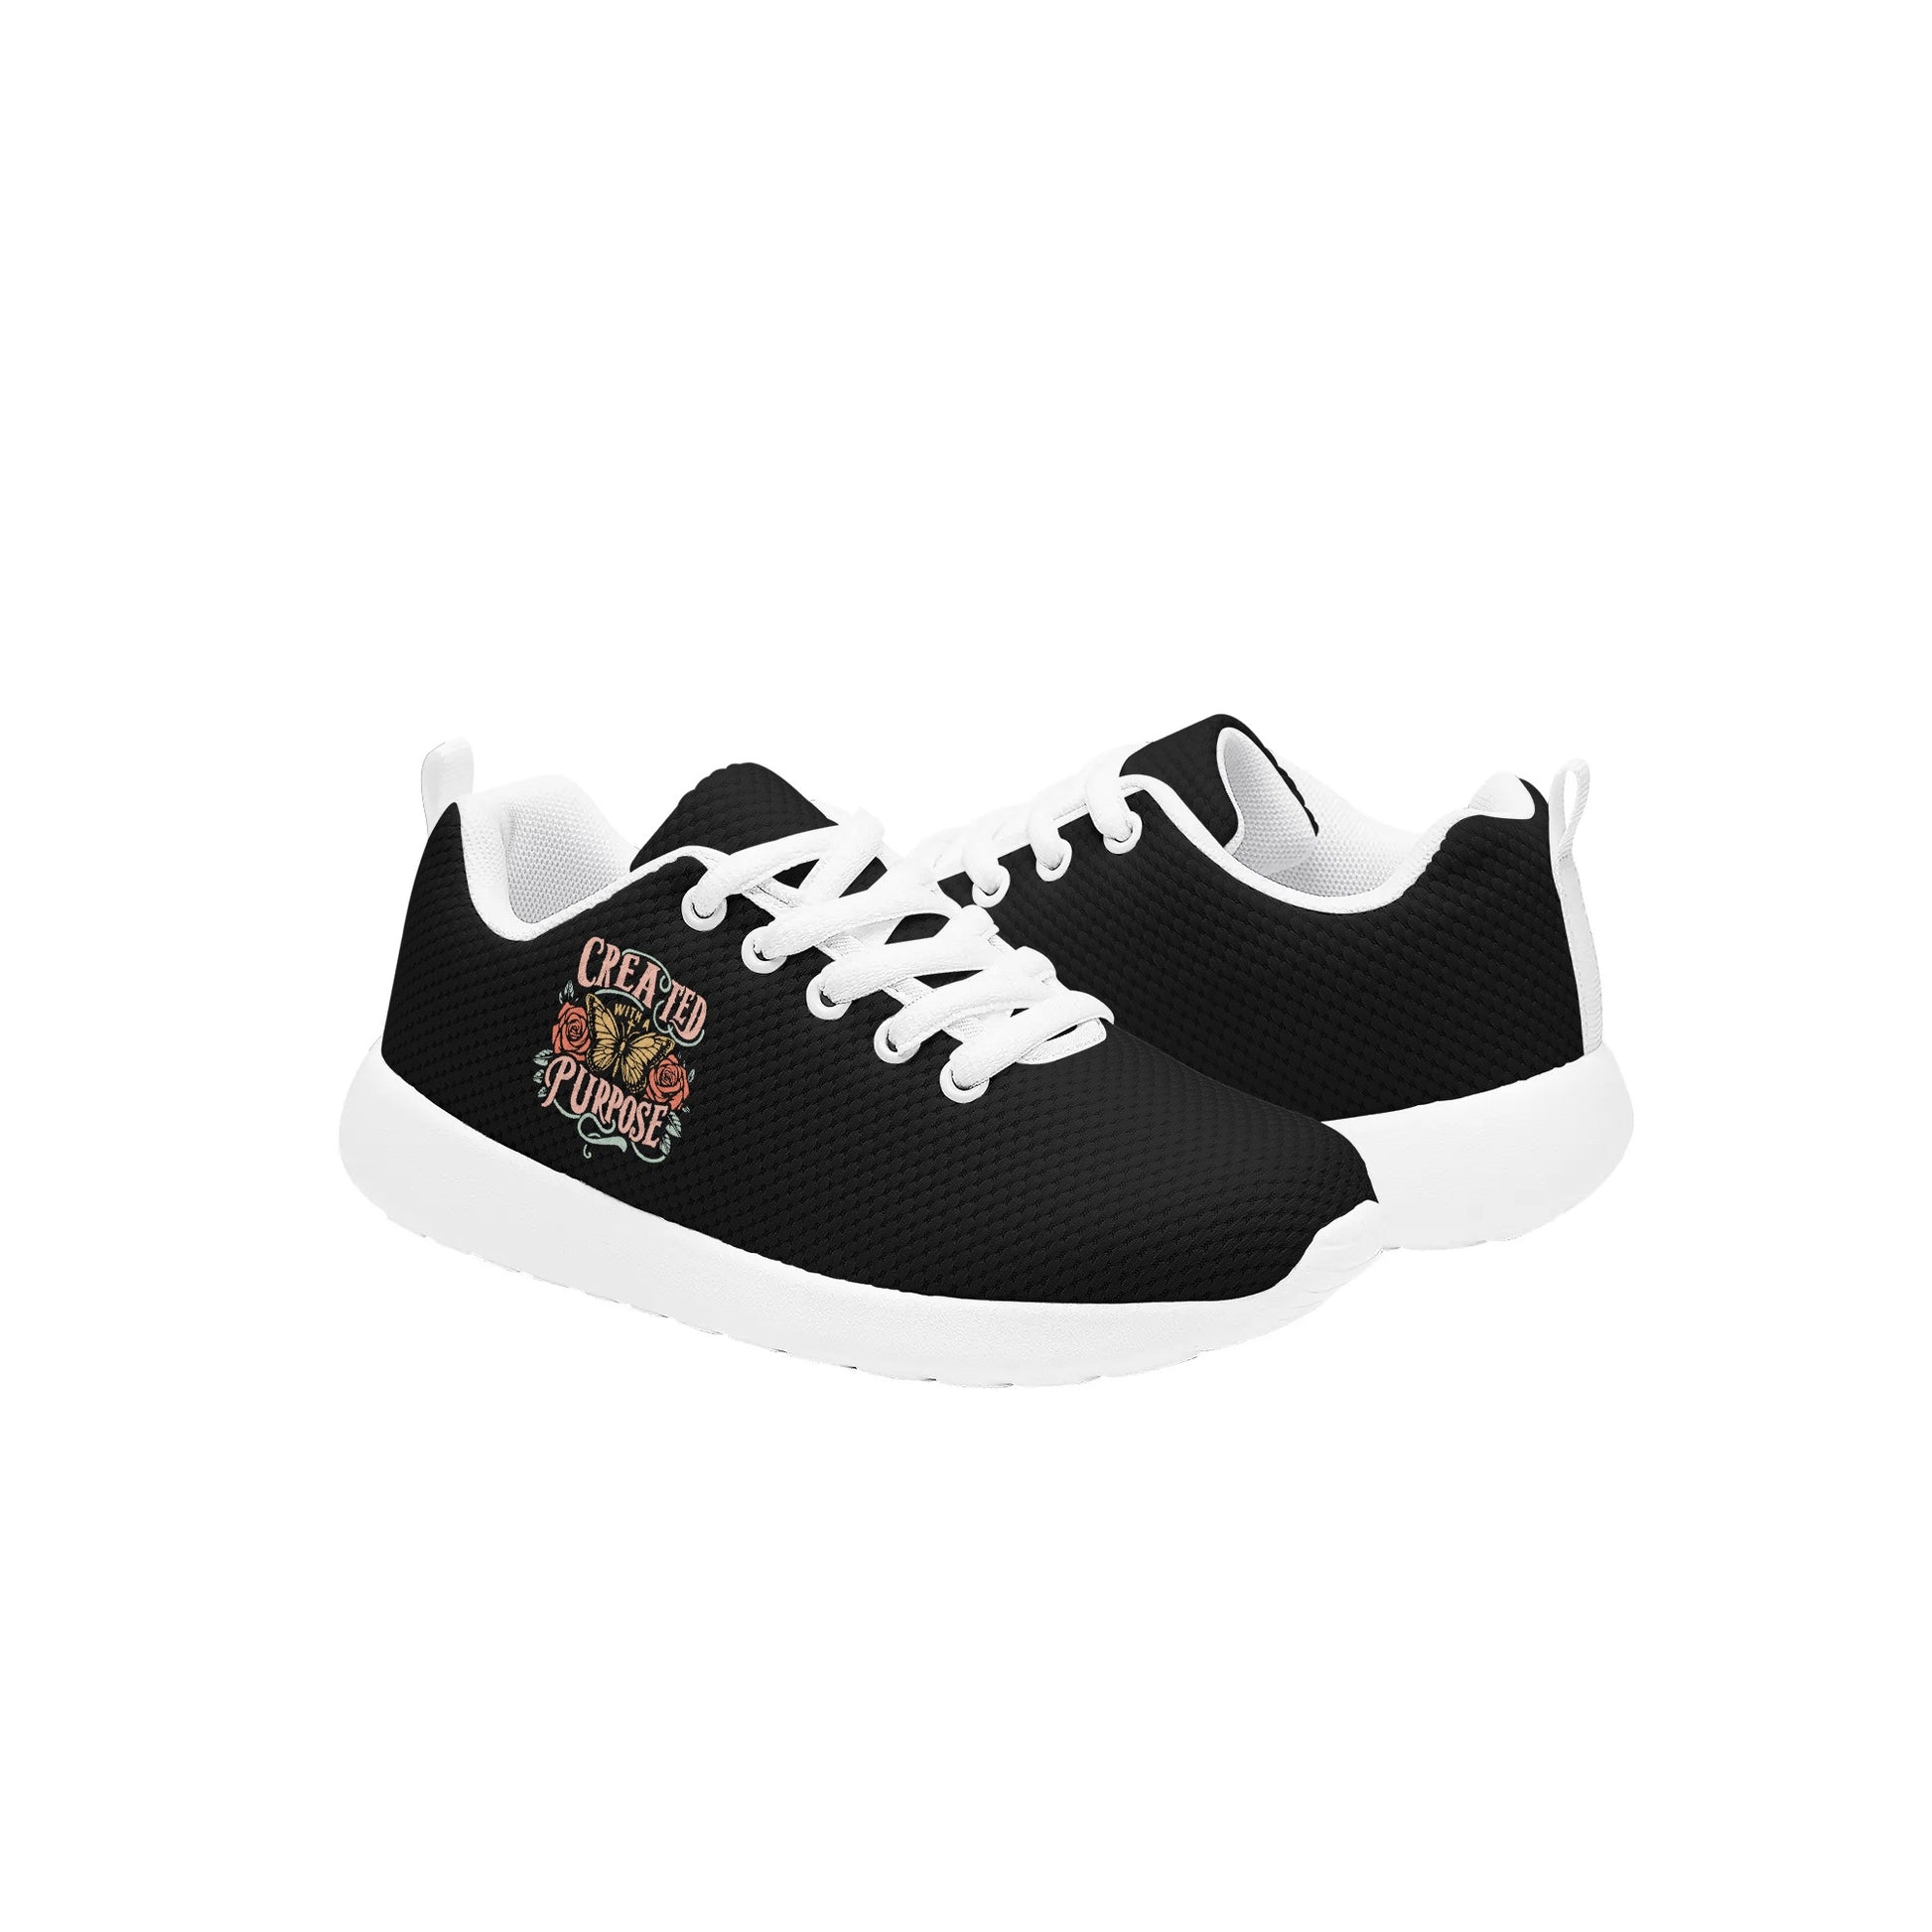 Created With A Purpose Kids Lace-up Athletic Christian Sneakers popcustoms